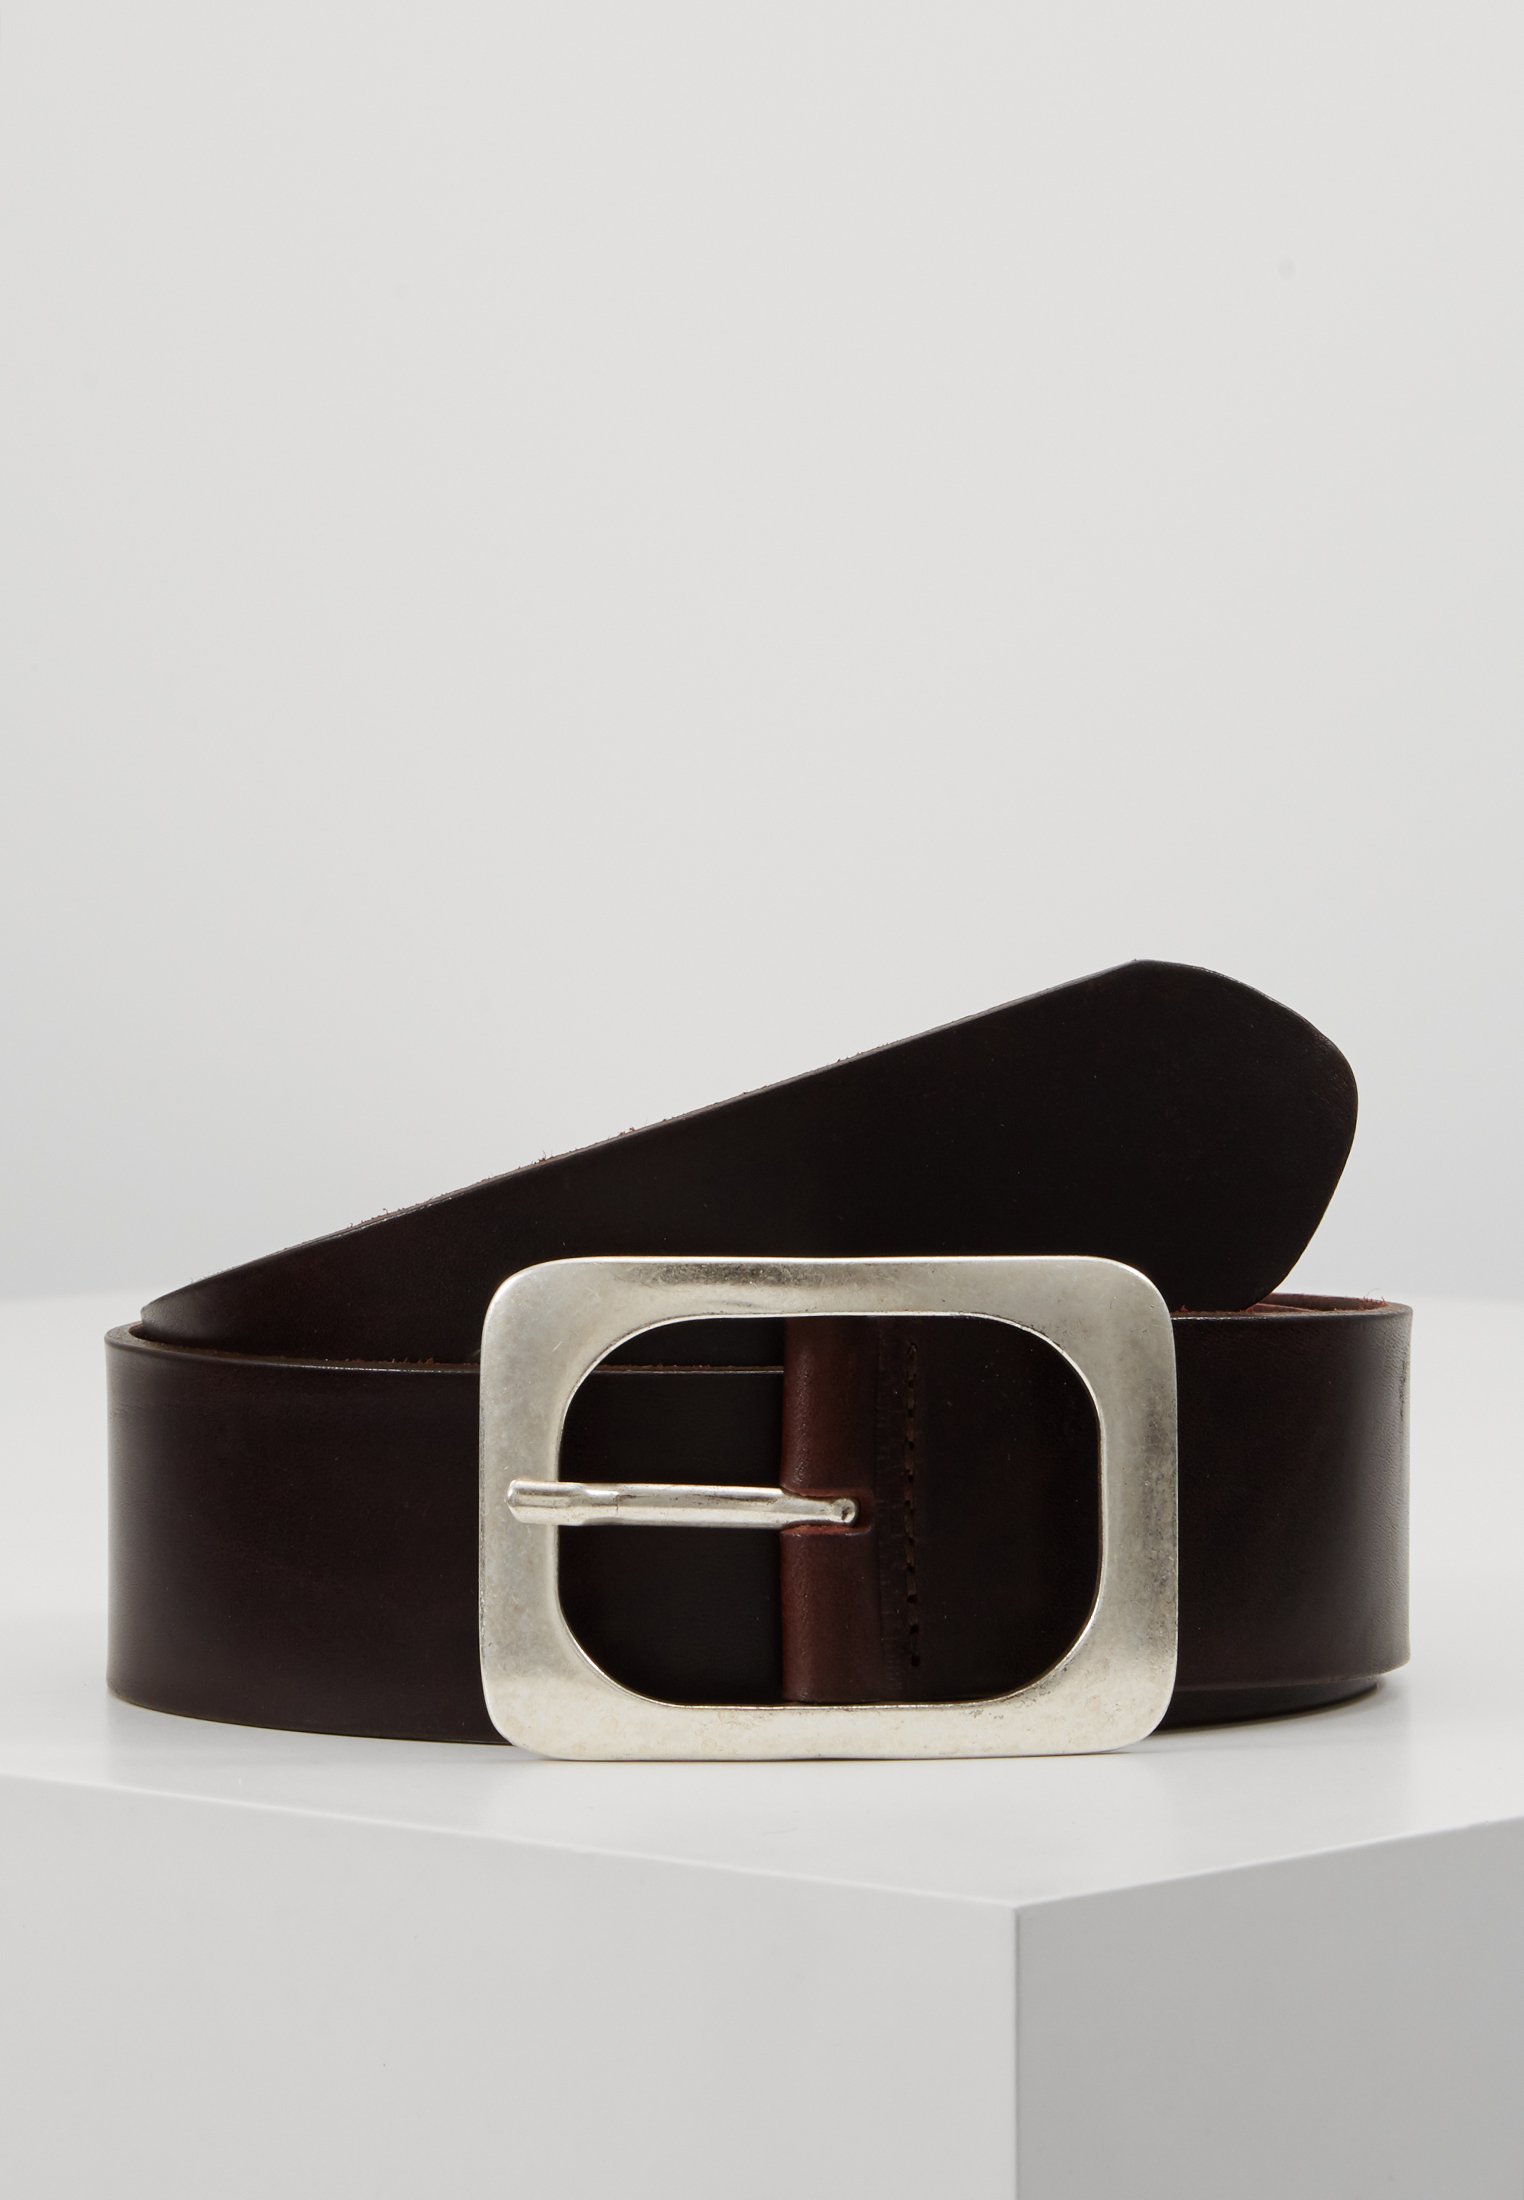 Buy Vanzetti Best-Selling Belt - With 55% Discount!